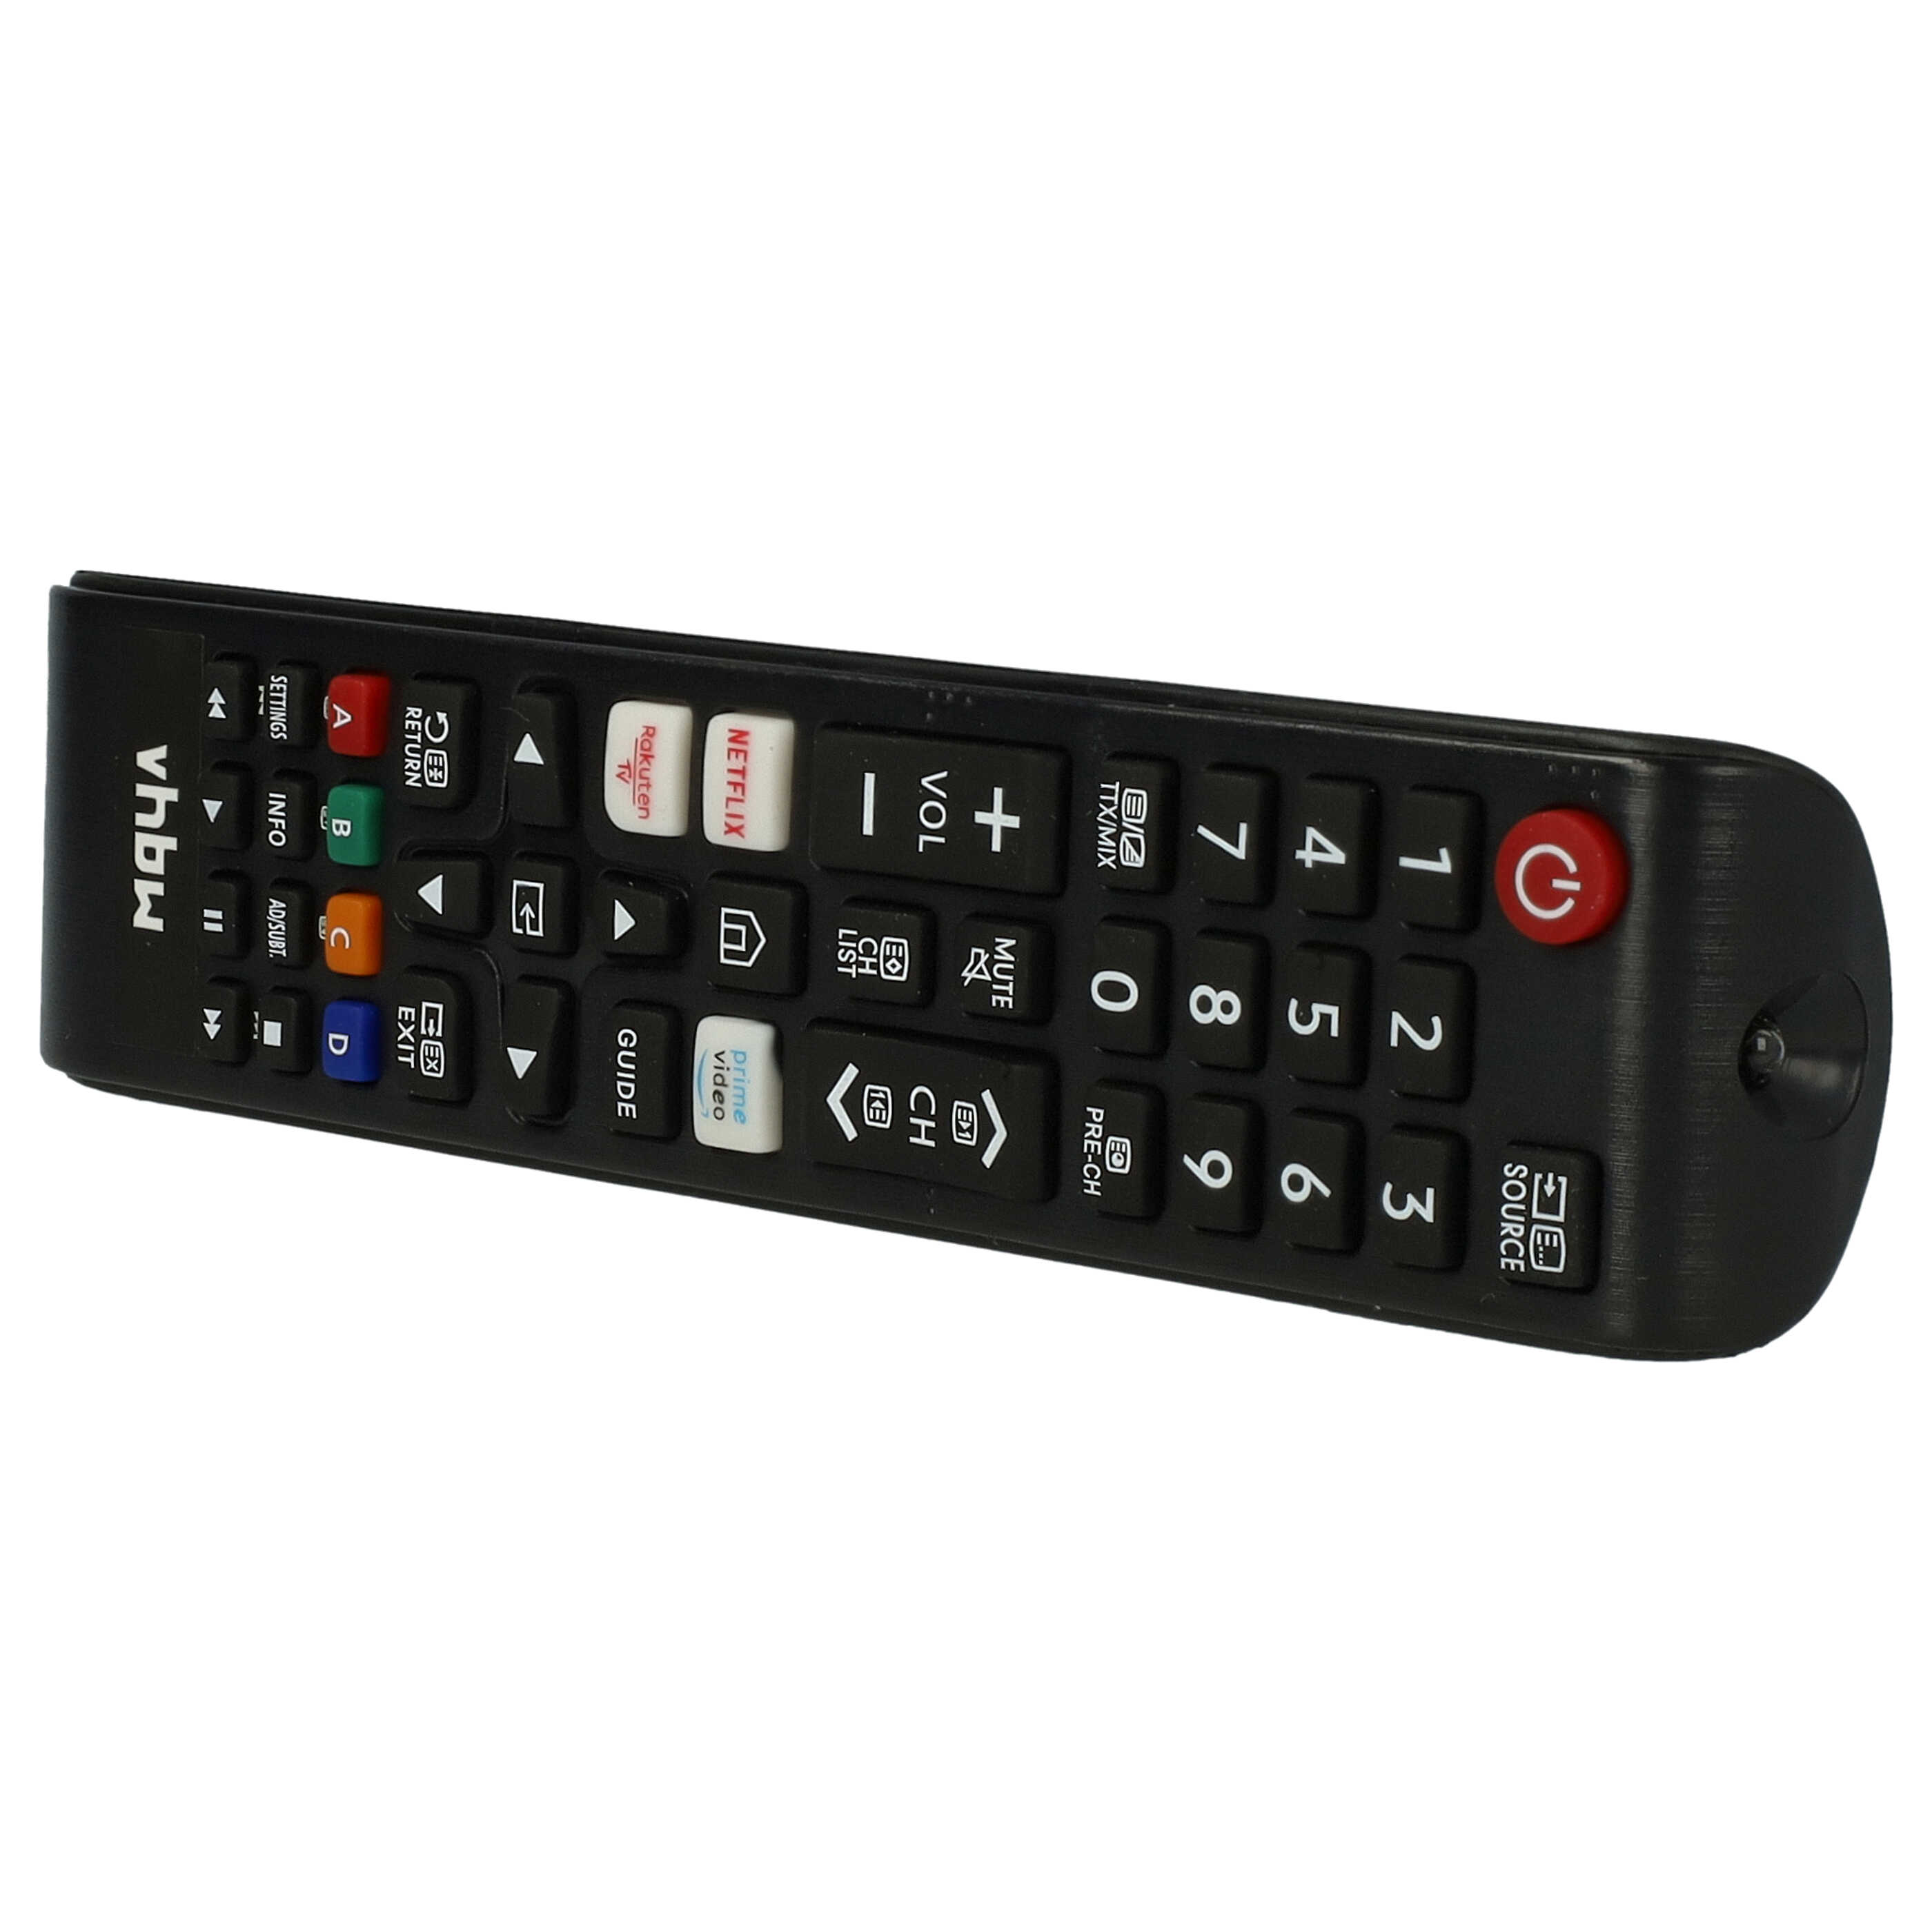 Remote Control replaces Samsung BN59-01315B for Samsung TV